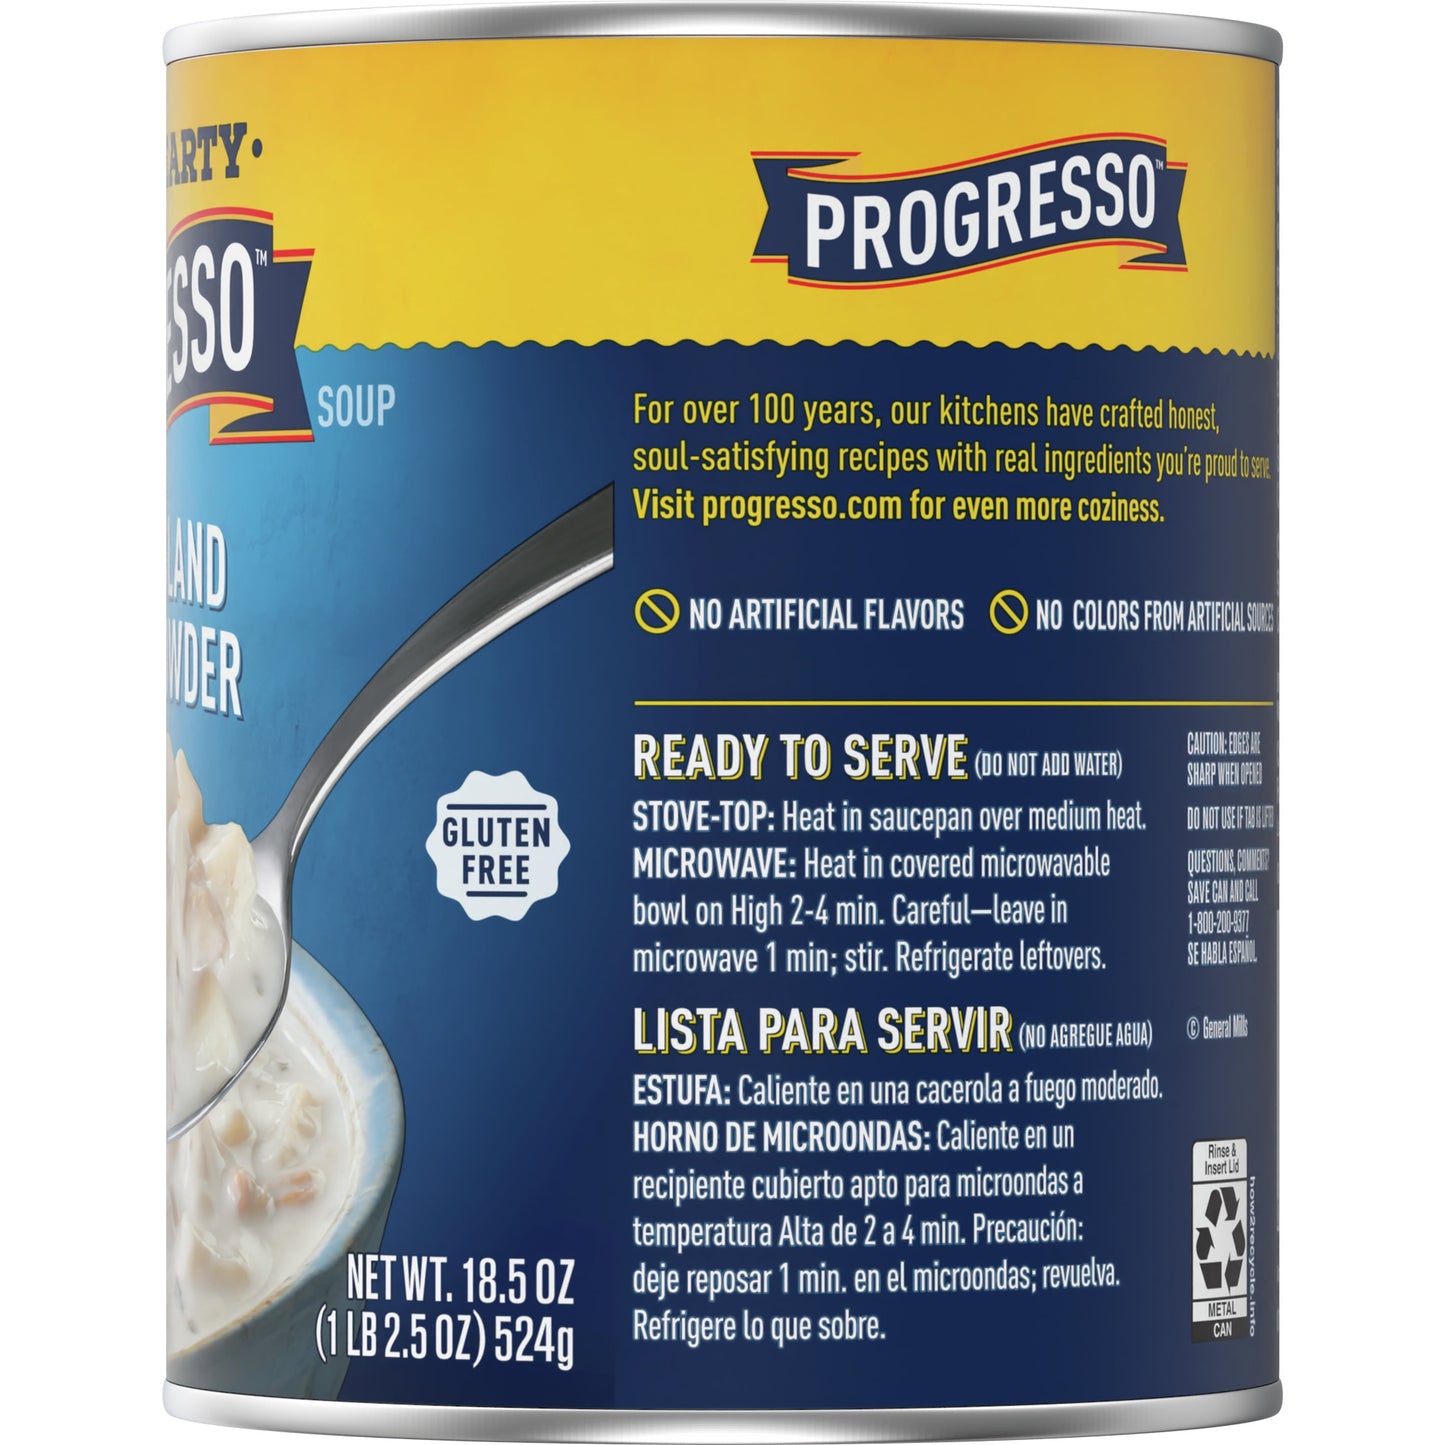 Progresso New England Clam Chowder Soup, Rich & Hearty Canned Soup, Gluten Free, 18.5 oz